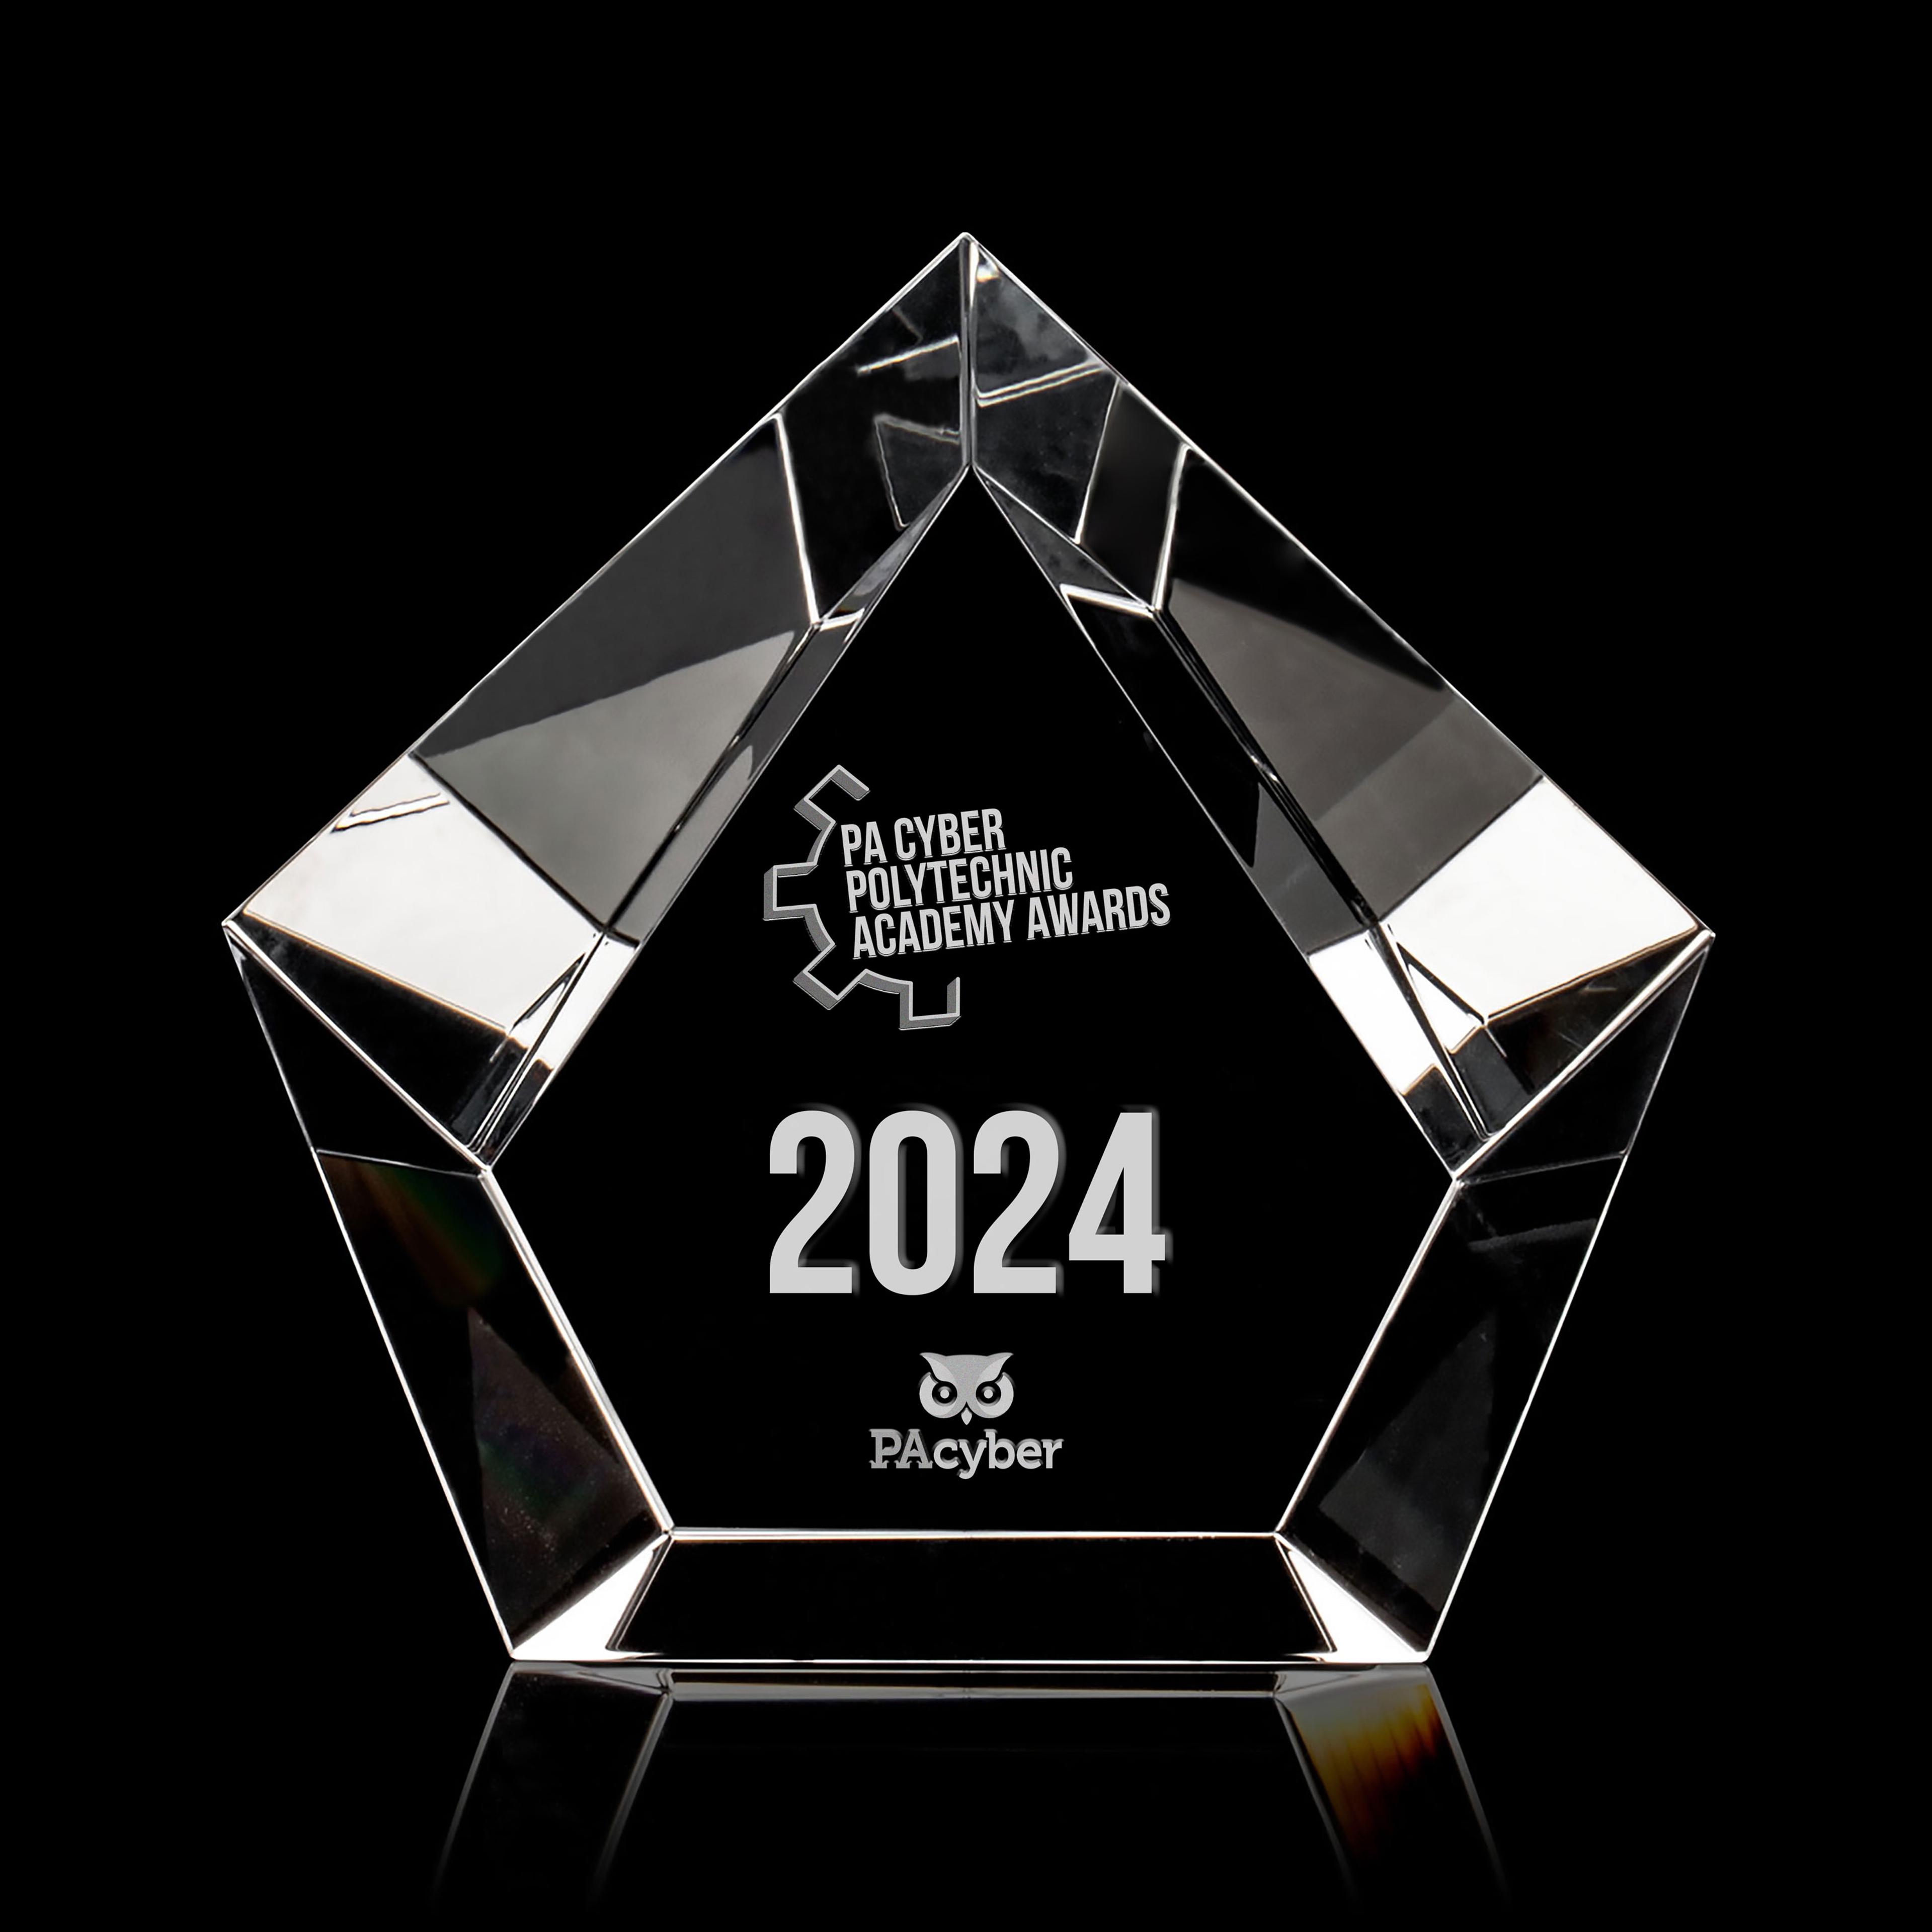 The Poly Award is a pentagon-shaped crystal with "PA Cyber Polytechnic Academy Awards" etched into the front.